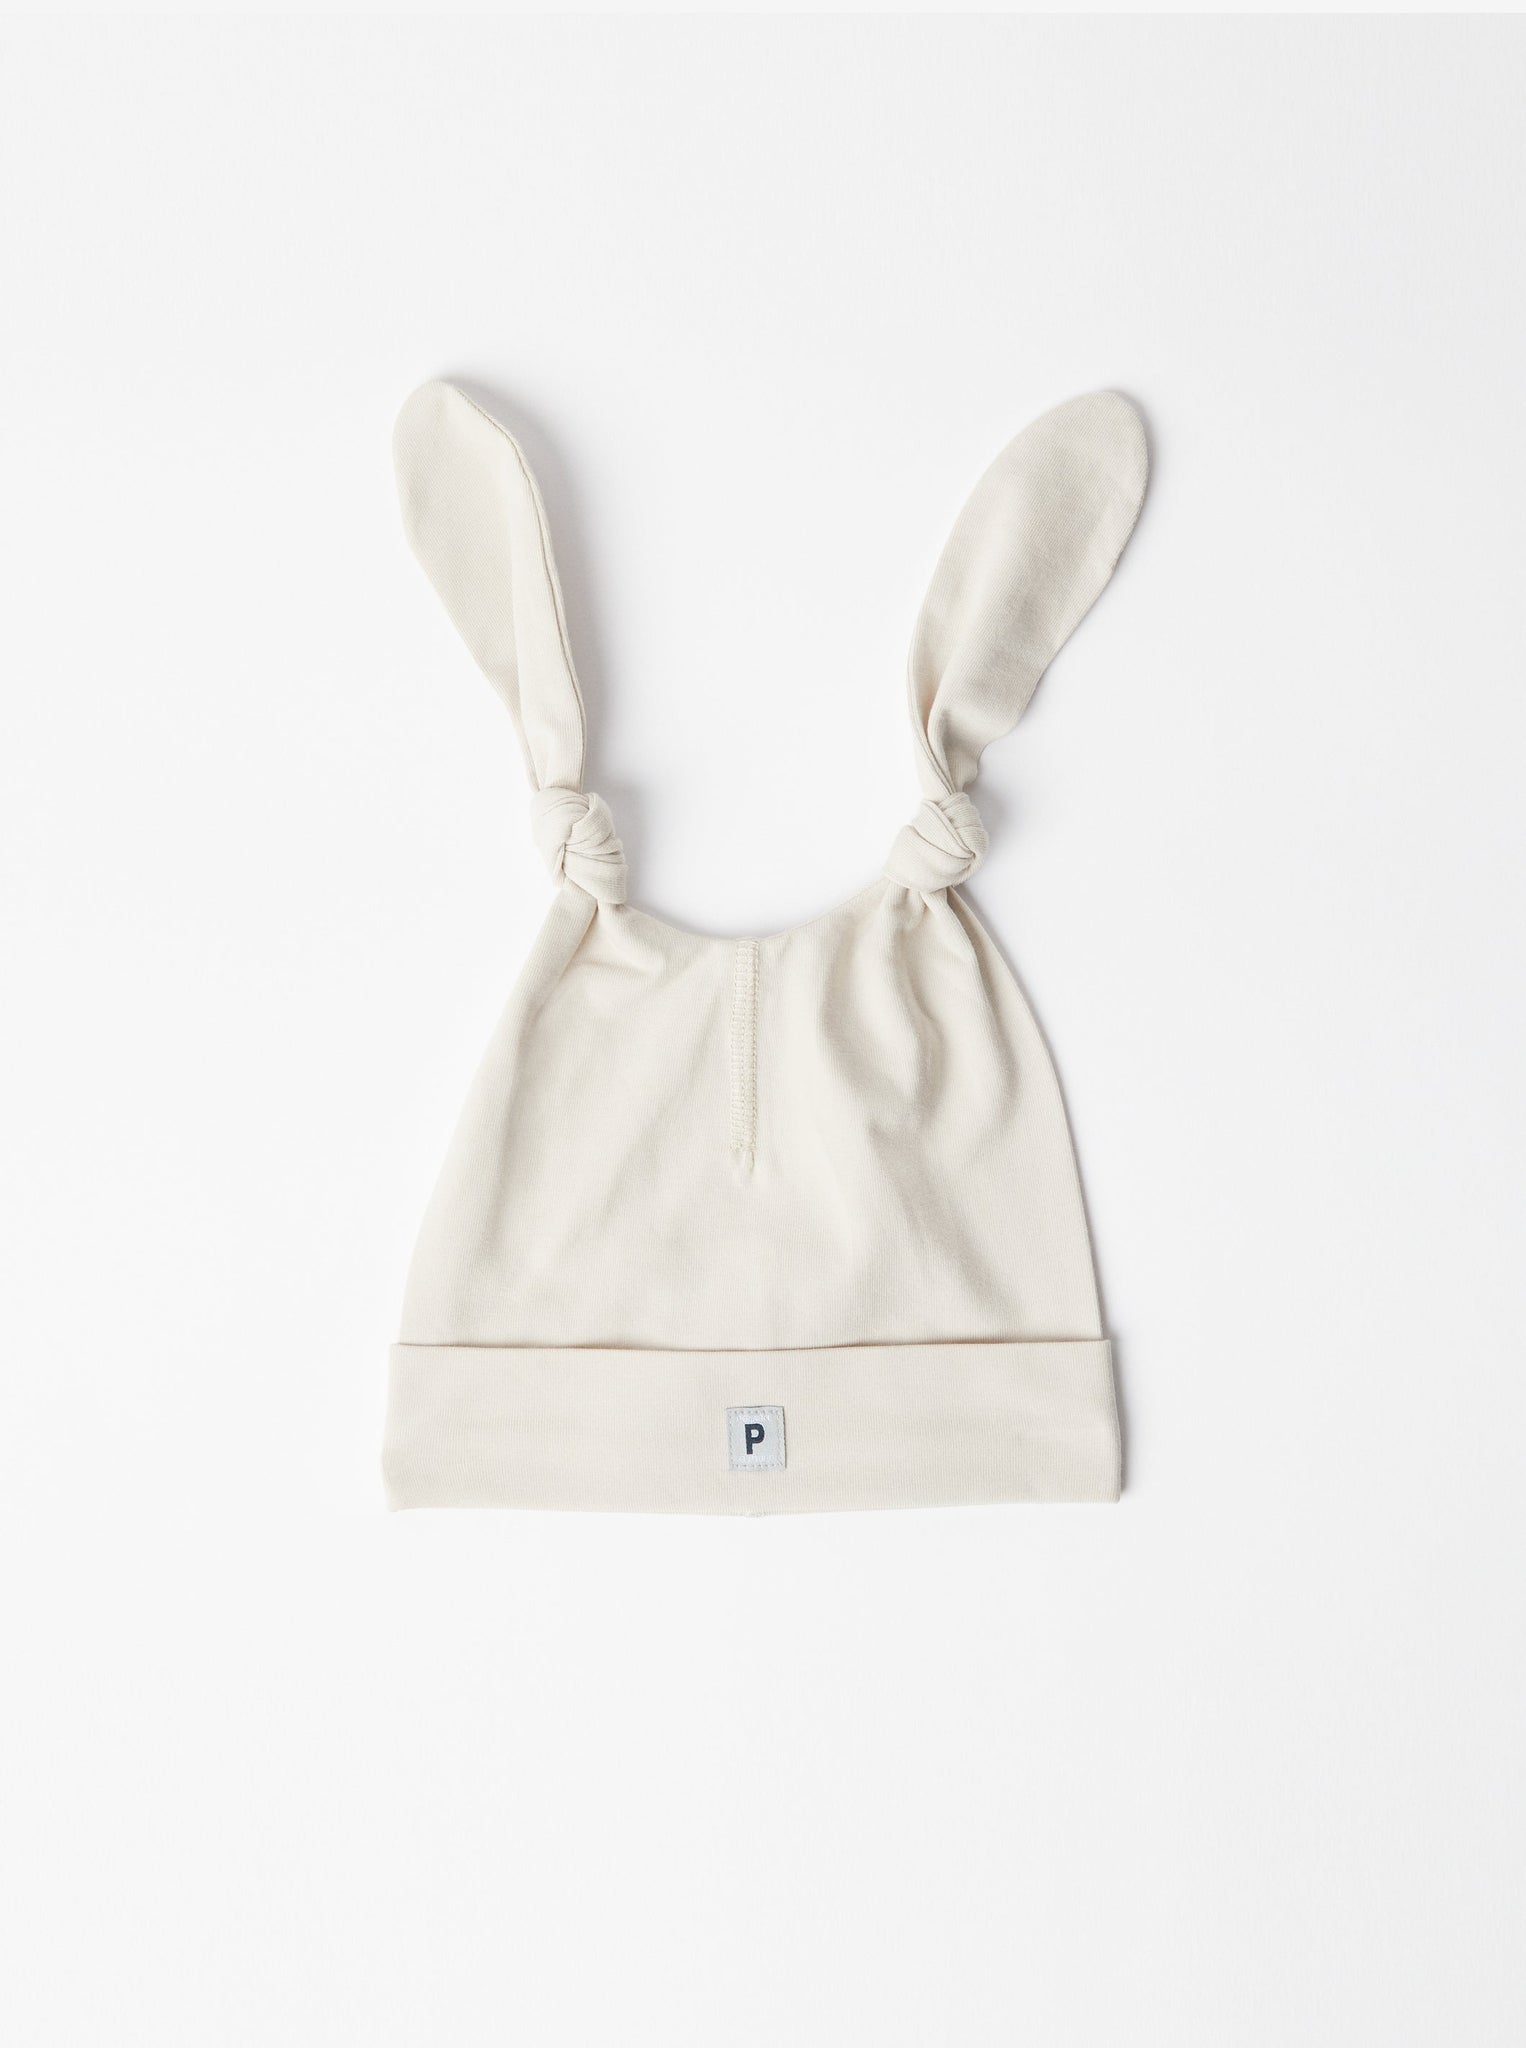 Newborn Baby Rabbit Ear Beanie from the Polarn O. Pyret baby collection. The best ethical baby clothes